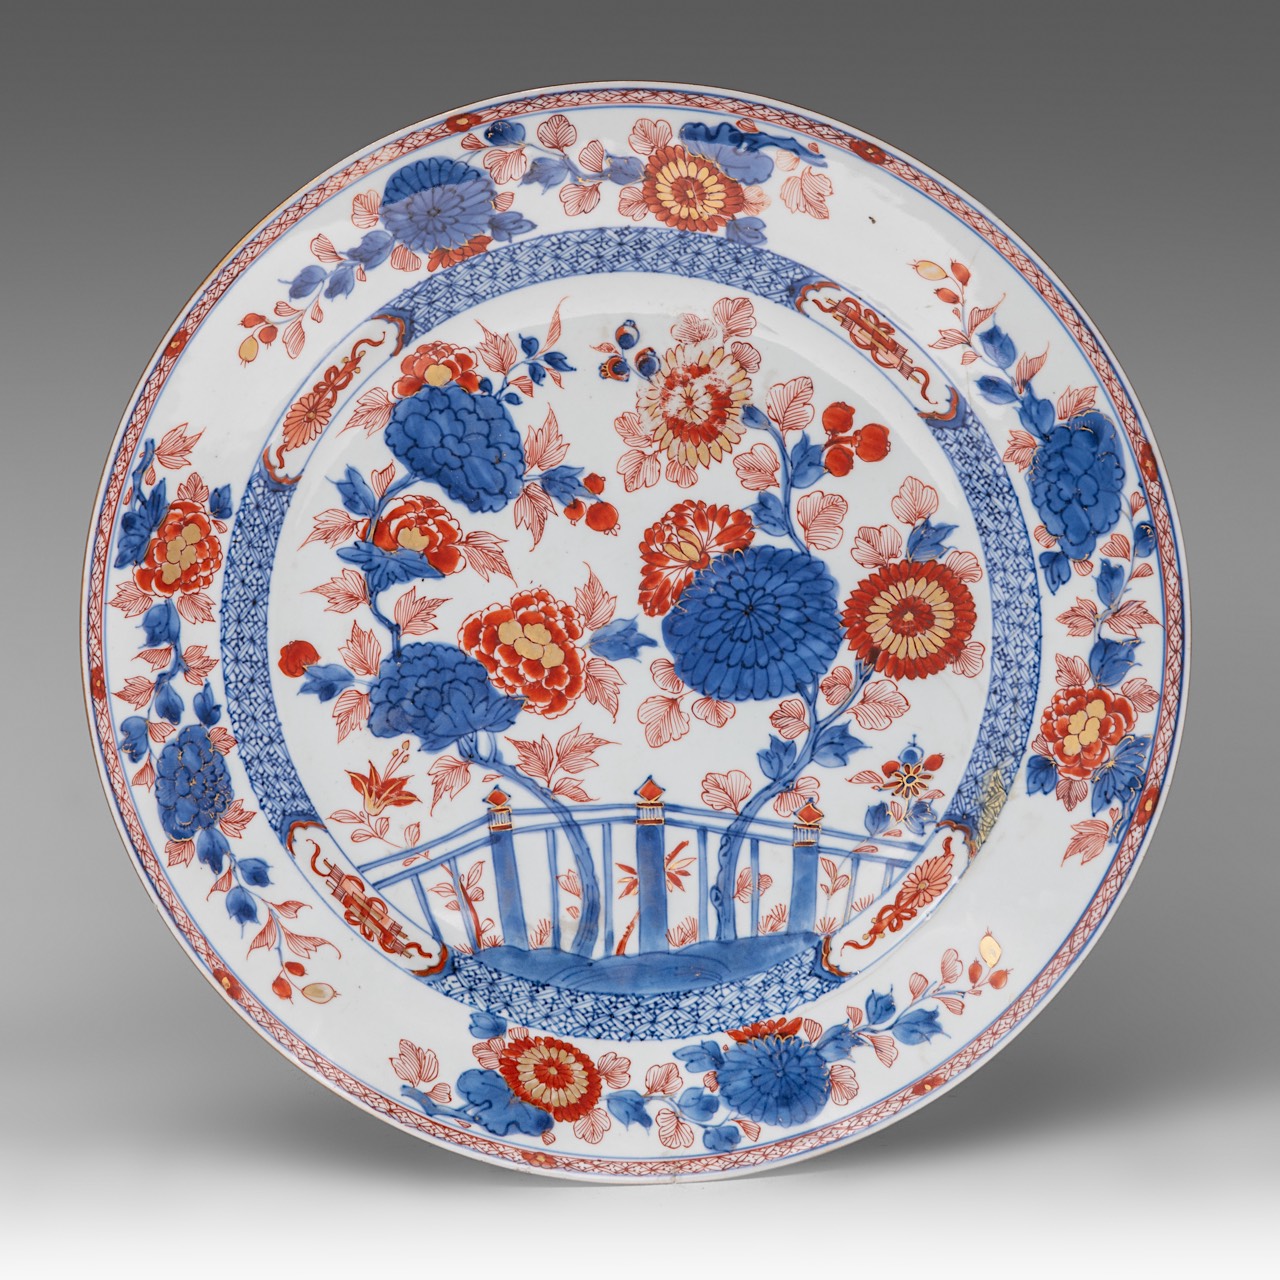 A Chinese Imari 'Flower garden' charger and plate, 18thC, dia 31,5 - 38,5 cm - Image 2 of 5